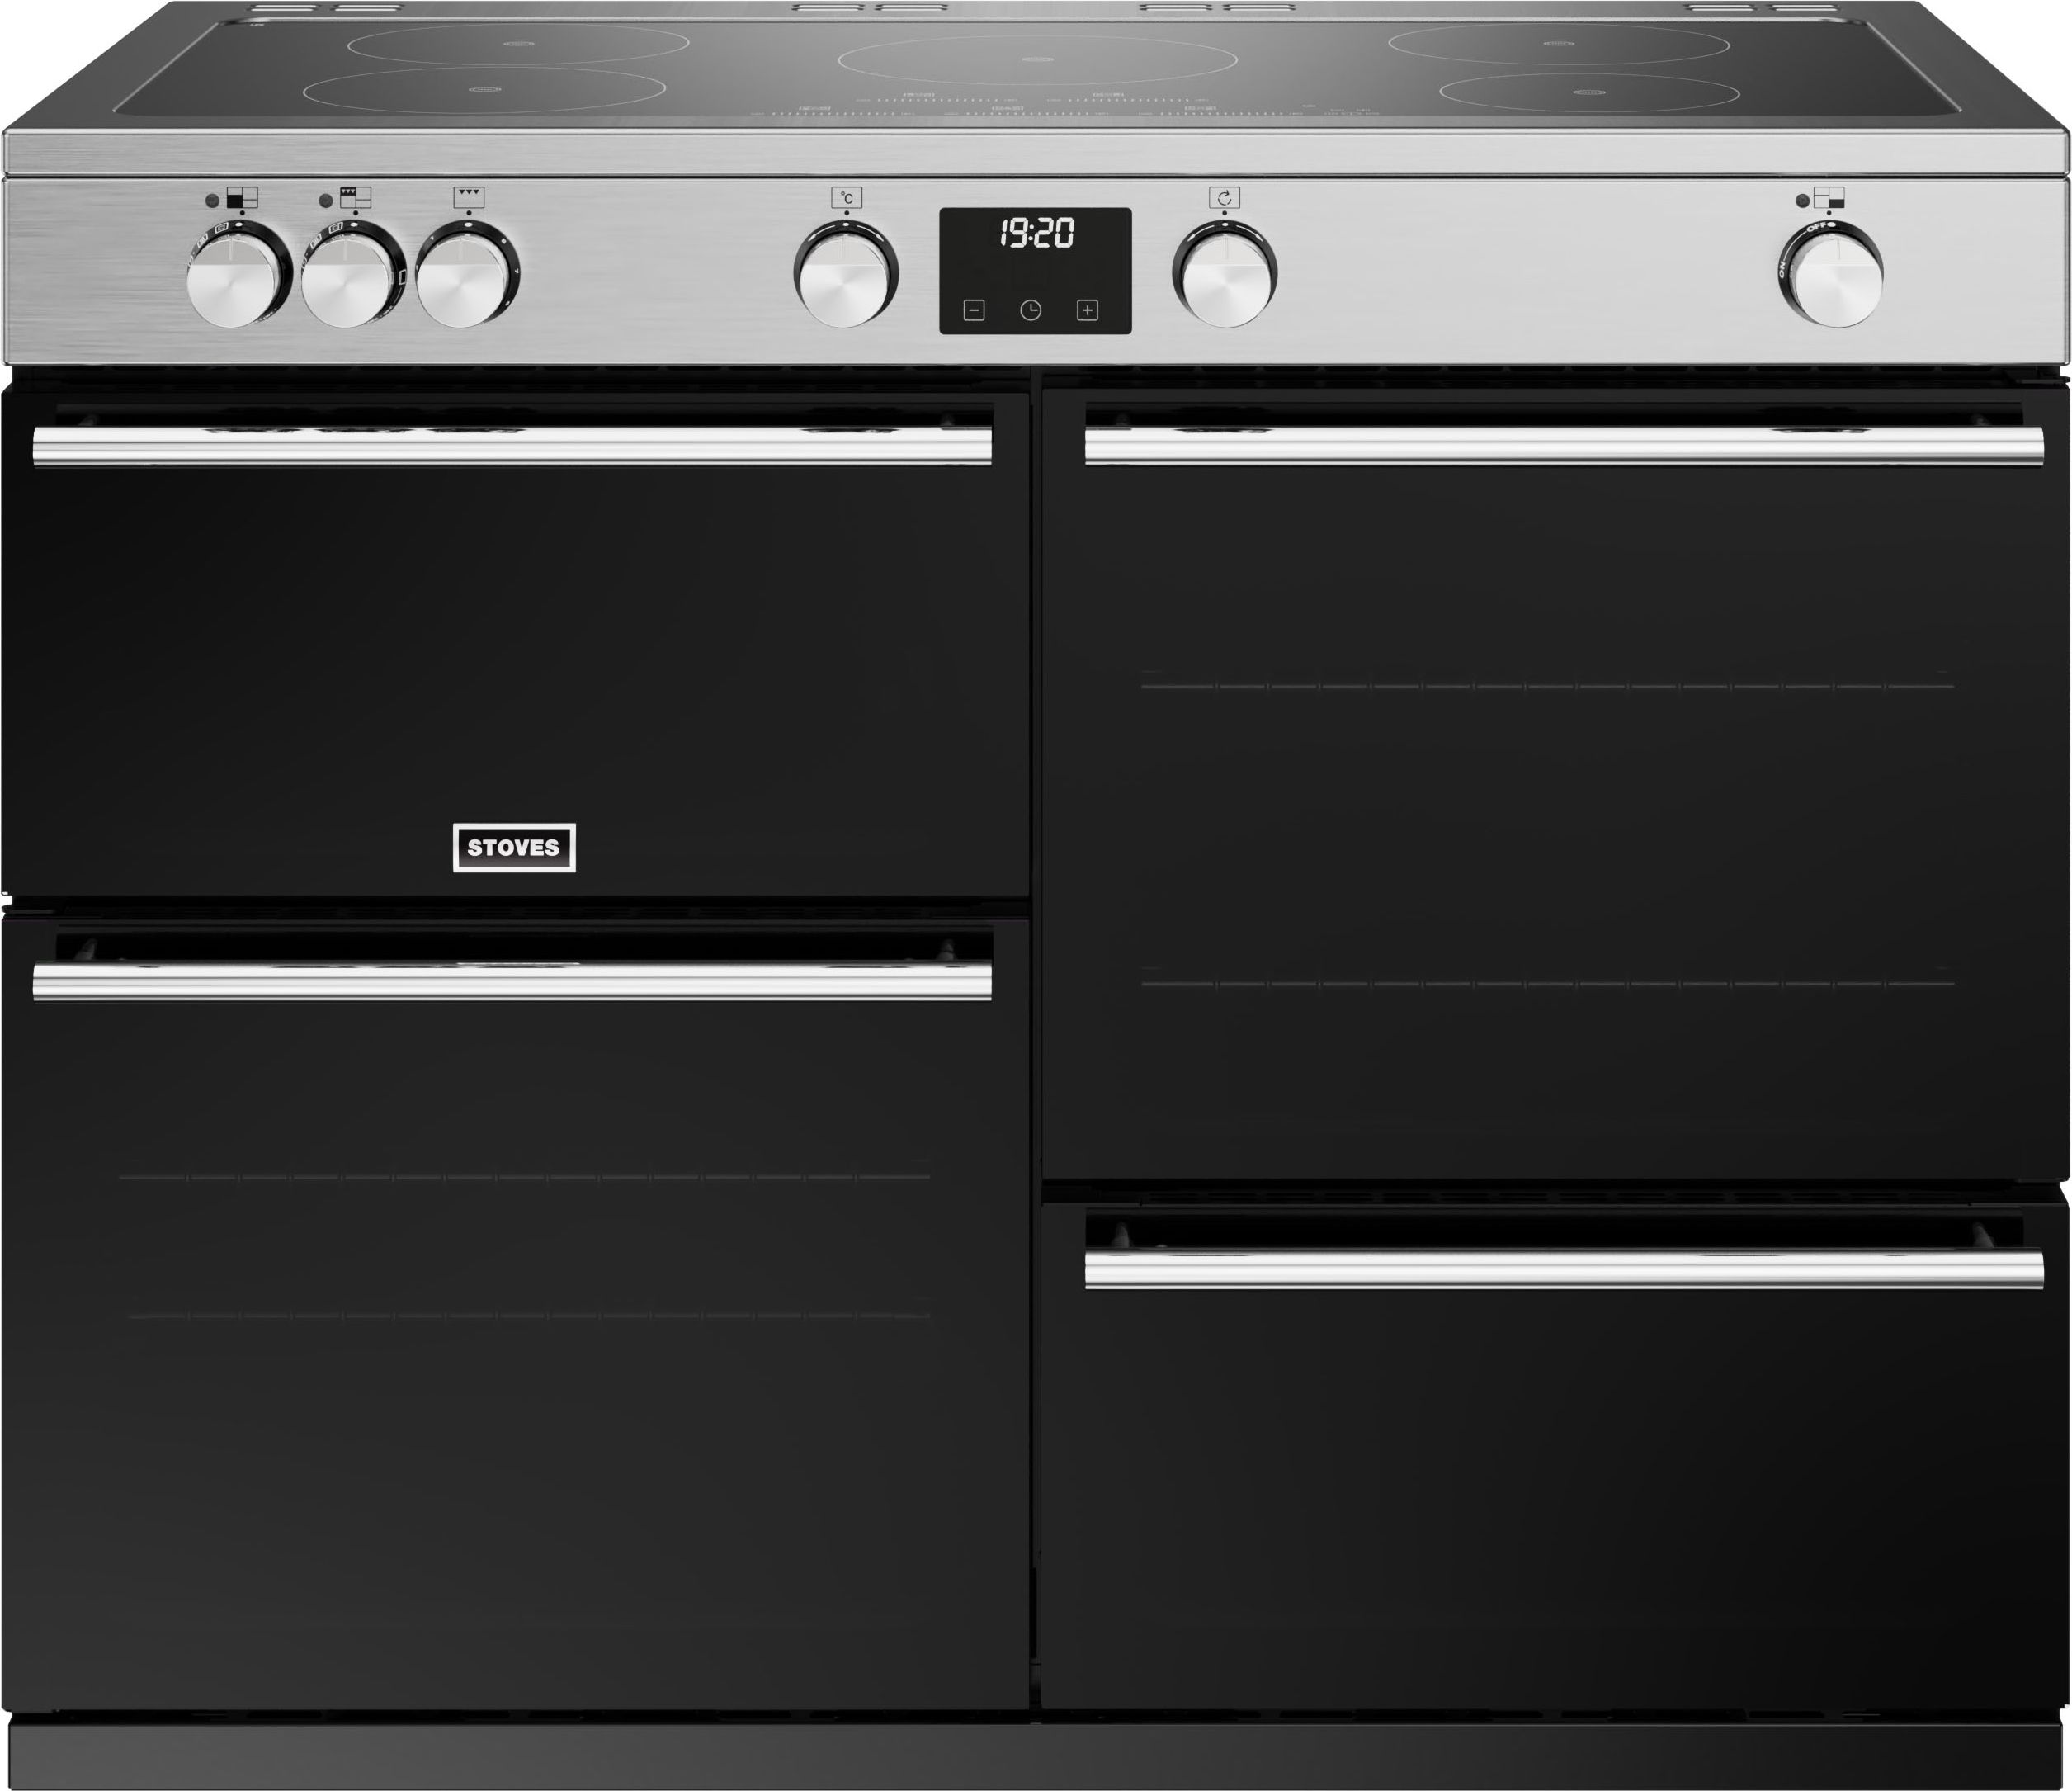 Stoves Precision Deluxe ST DX PREC D1100Ei TCH SS 110cm Electric Range Cooker with Induction Hob - Stainless Steel - A Rated, Stainless Steel